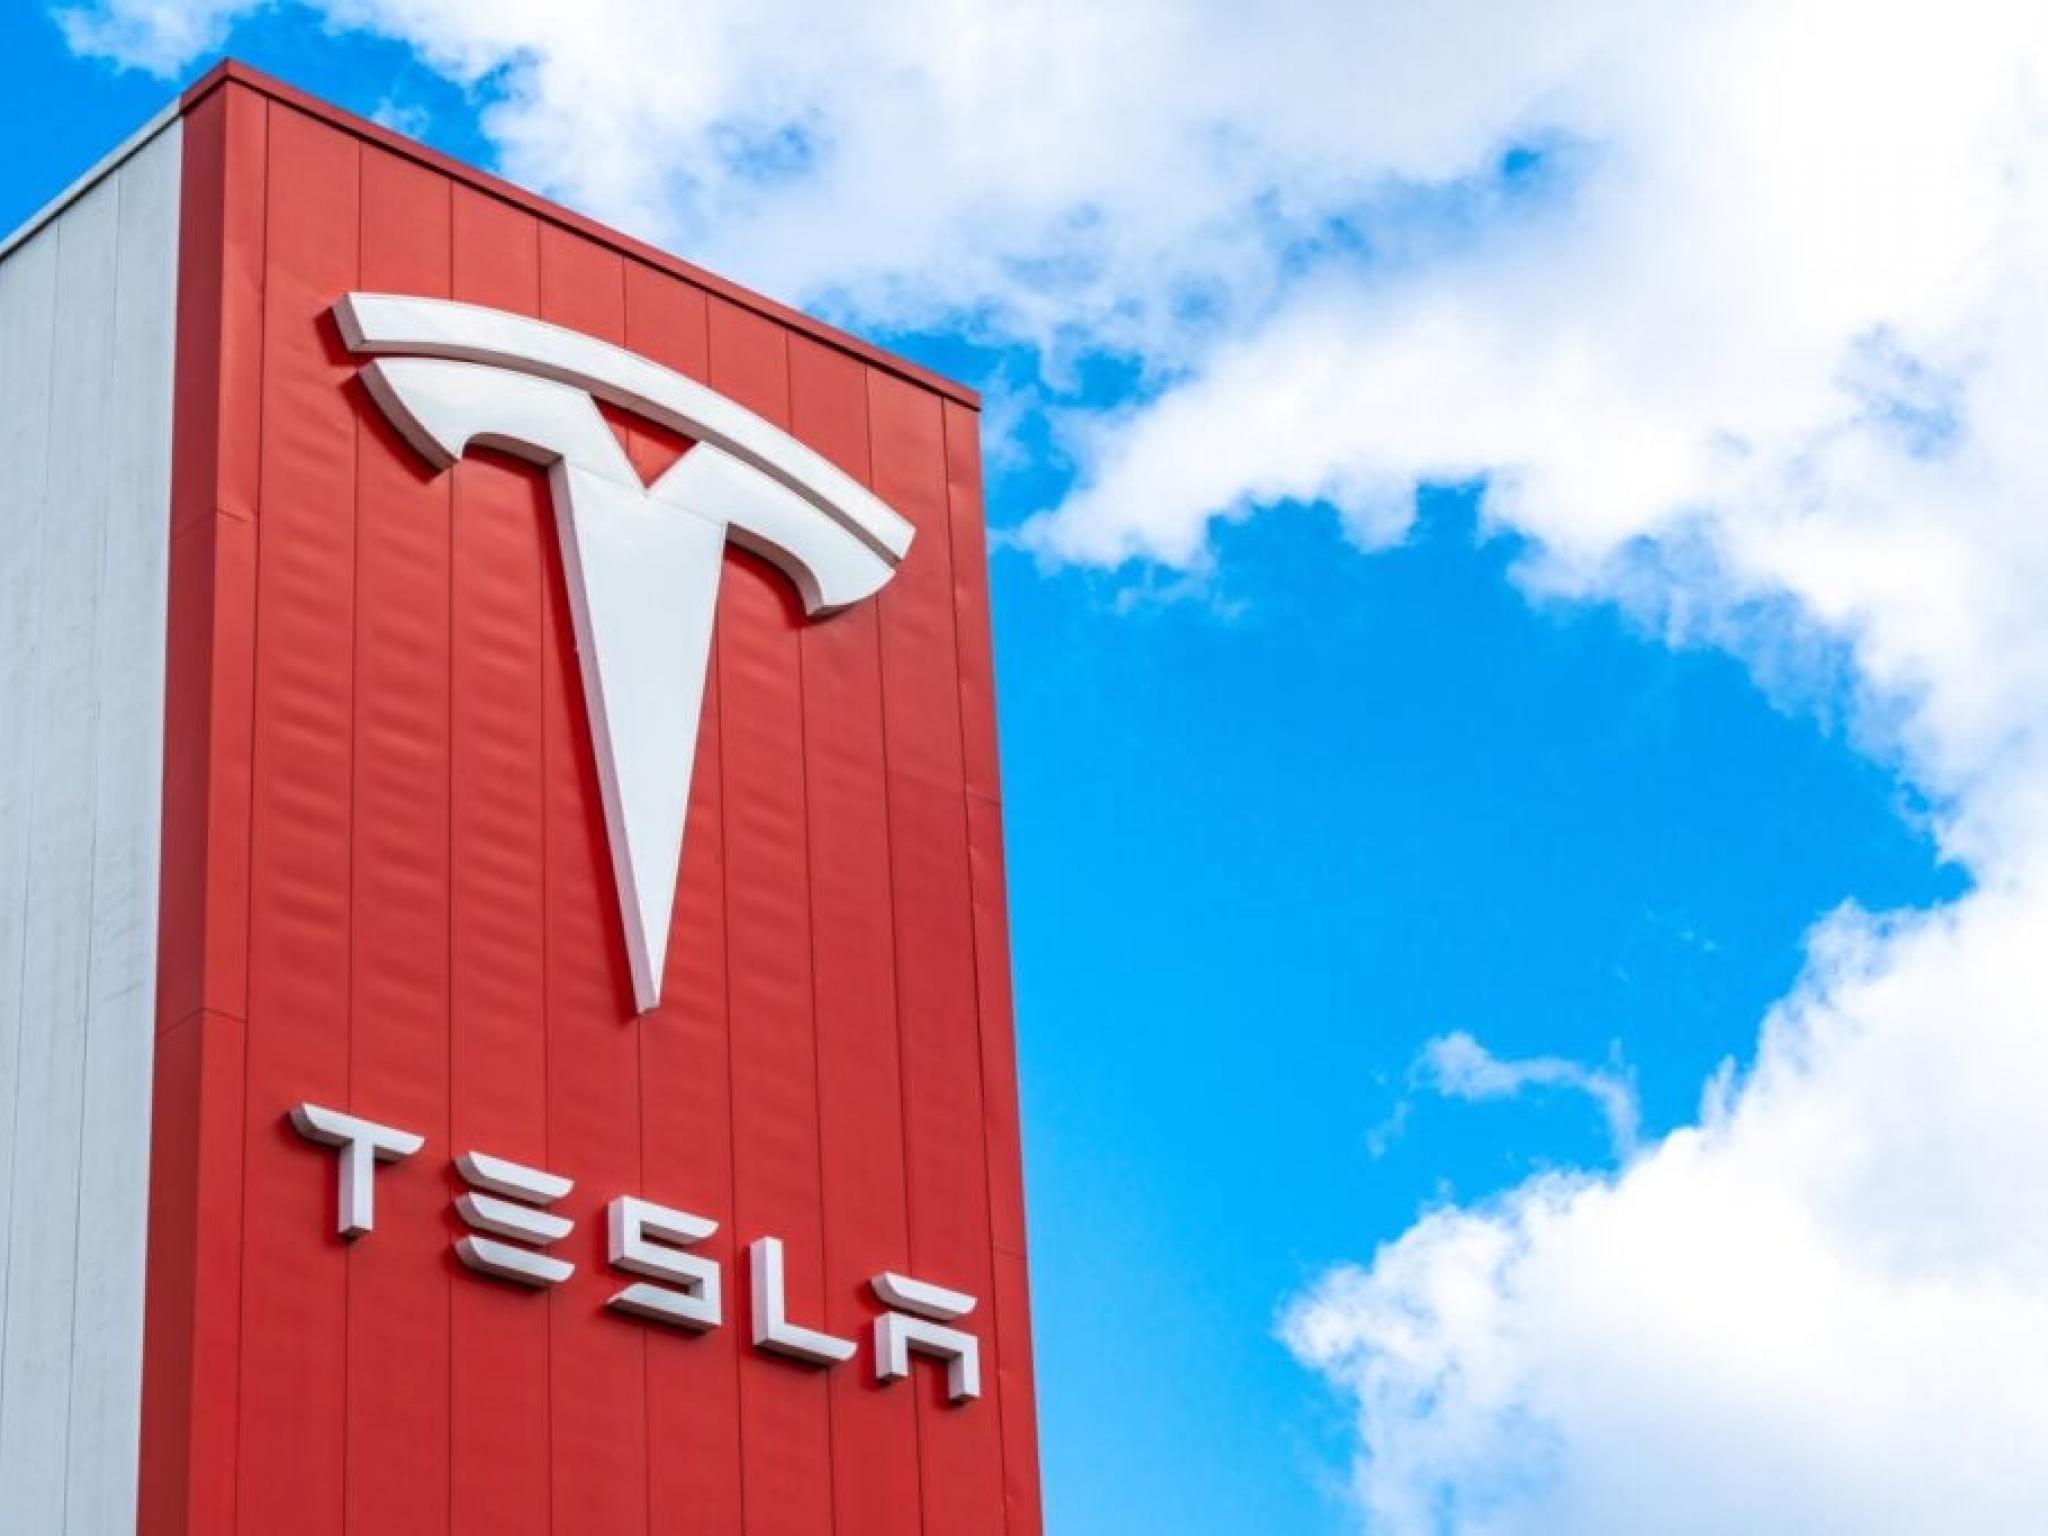  tesla-exodus-continues-as-top-hr-exec-reportedly-departs-after-string-of-senior-exits 